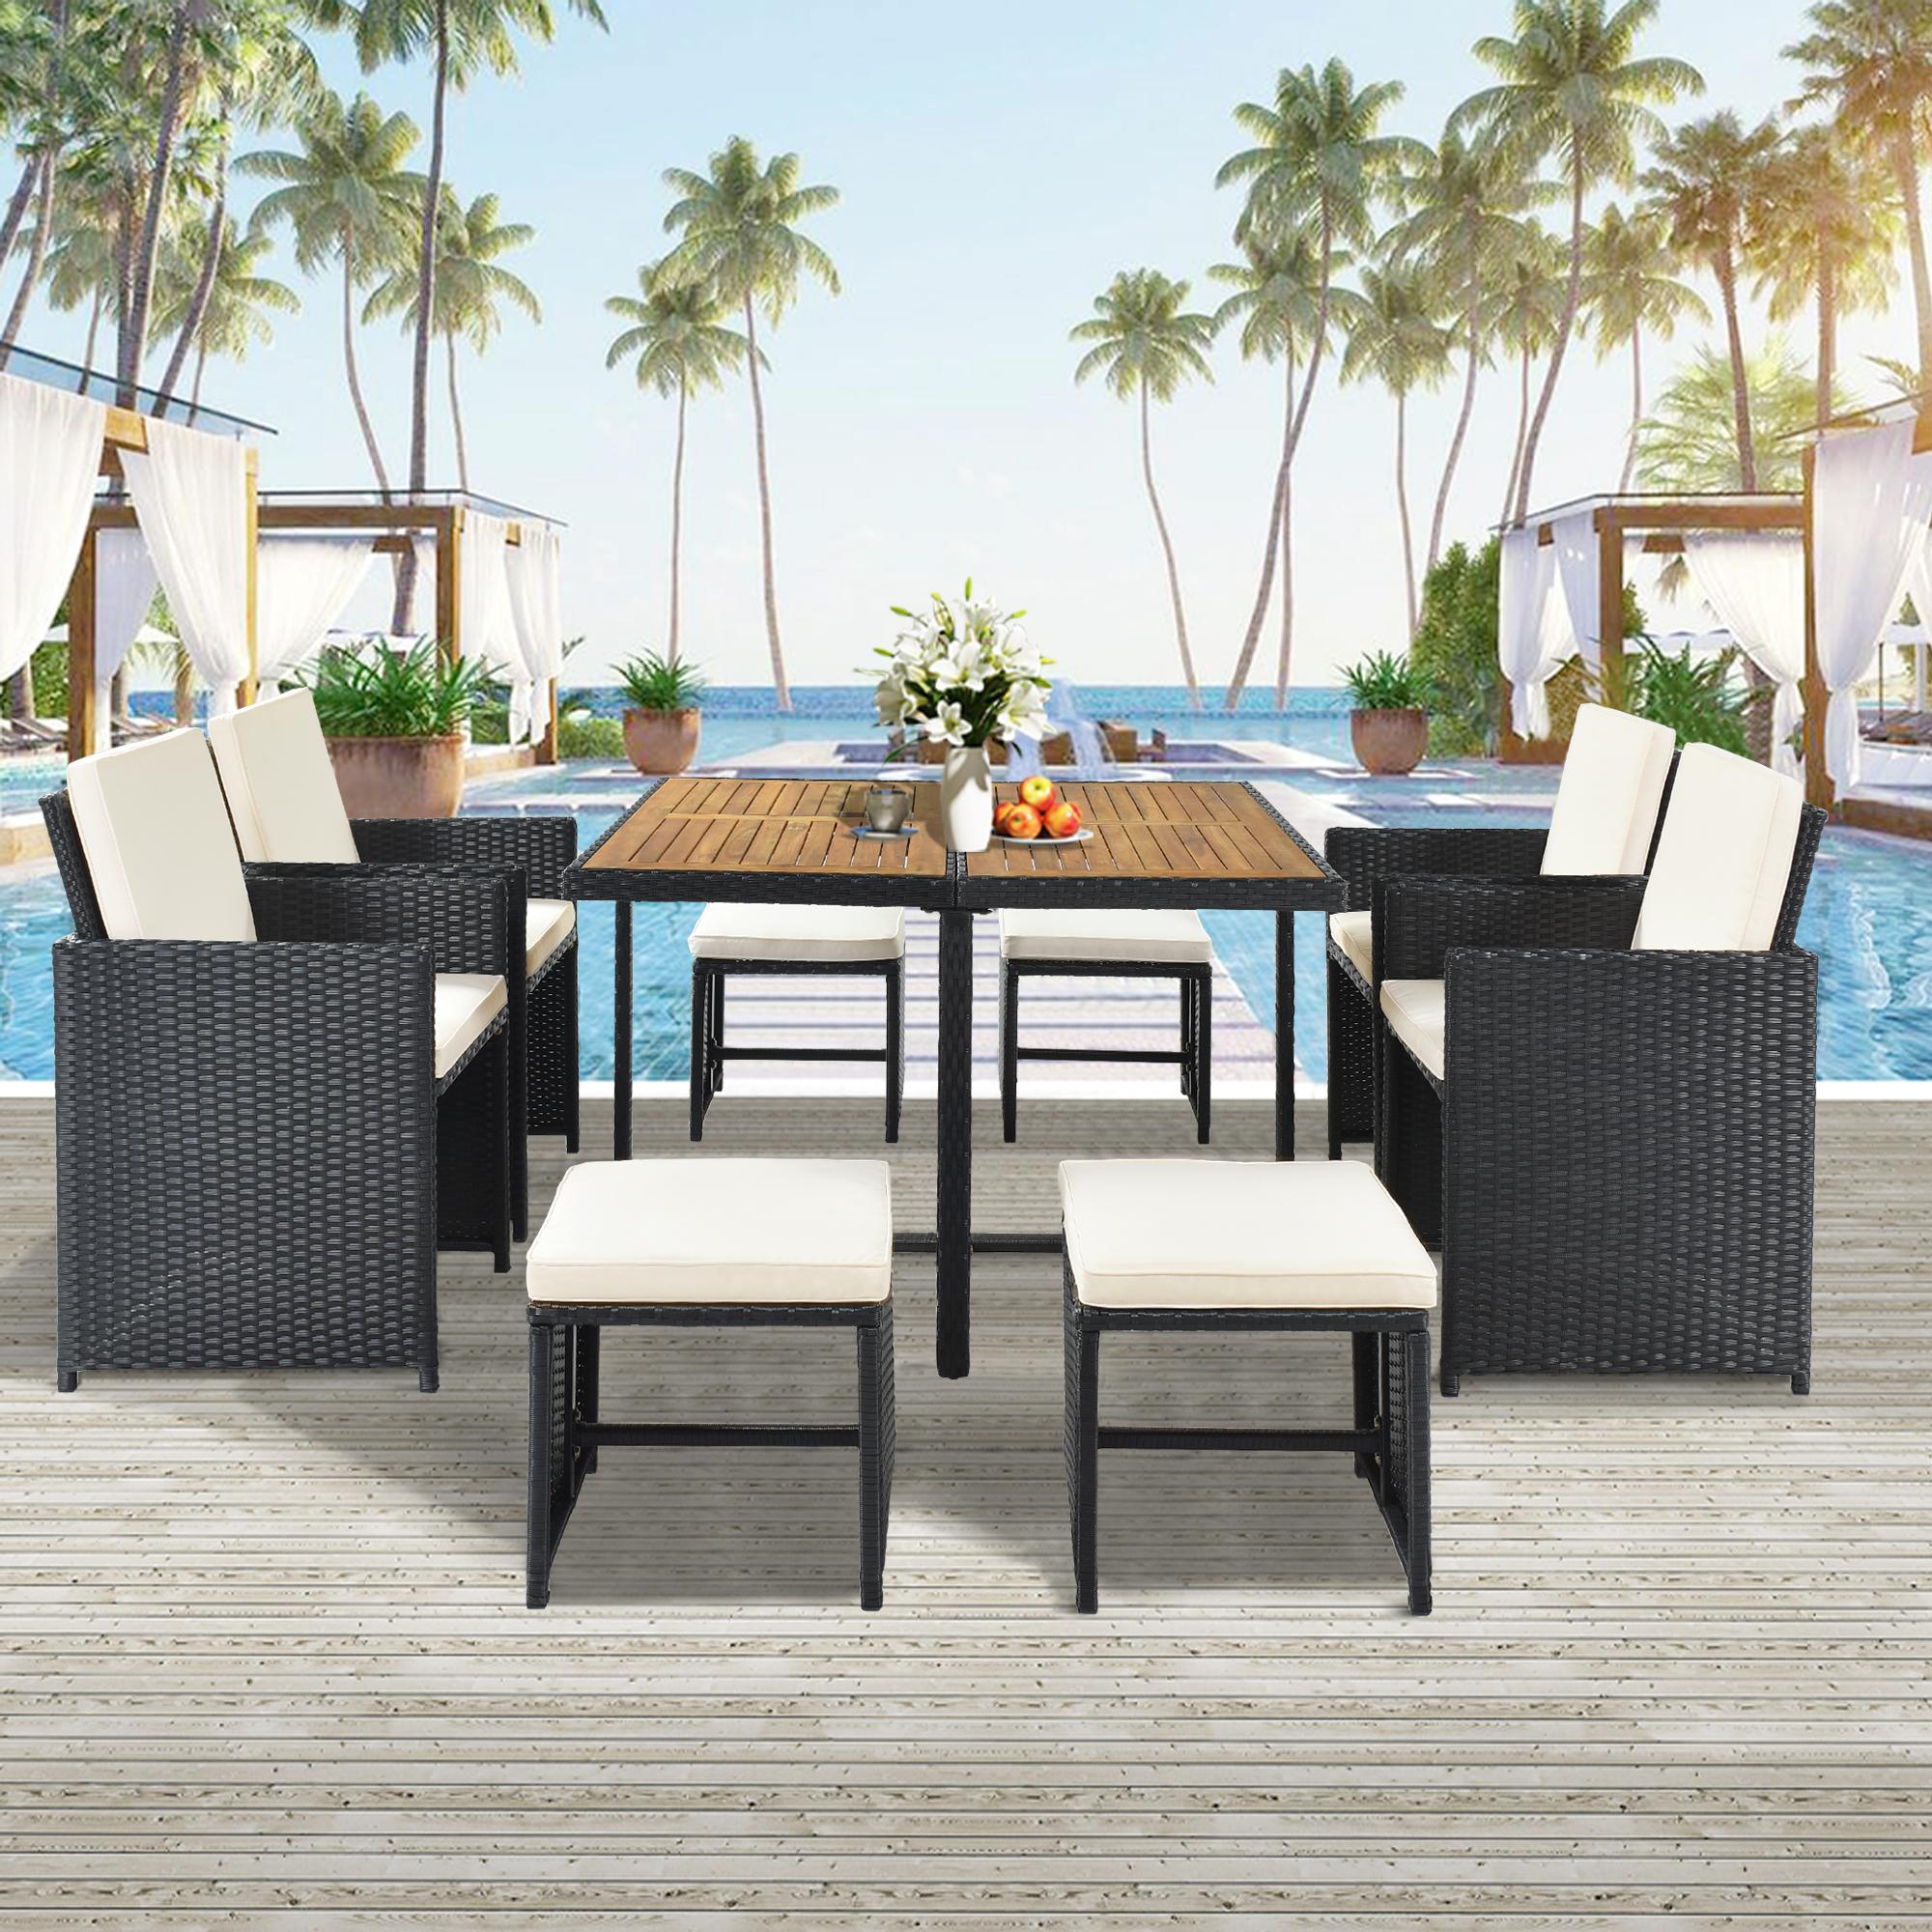 Outdoor Garden Sectional Patio Conversation Set, 9-Piece All-Weather PE Wicker Dining Set with 4 Stools, Removable Cushions, Solid Wood Coffee Table for Porch Pool Backyard, 330lbs, S6030 - image 2 of 9